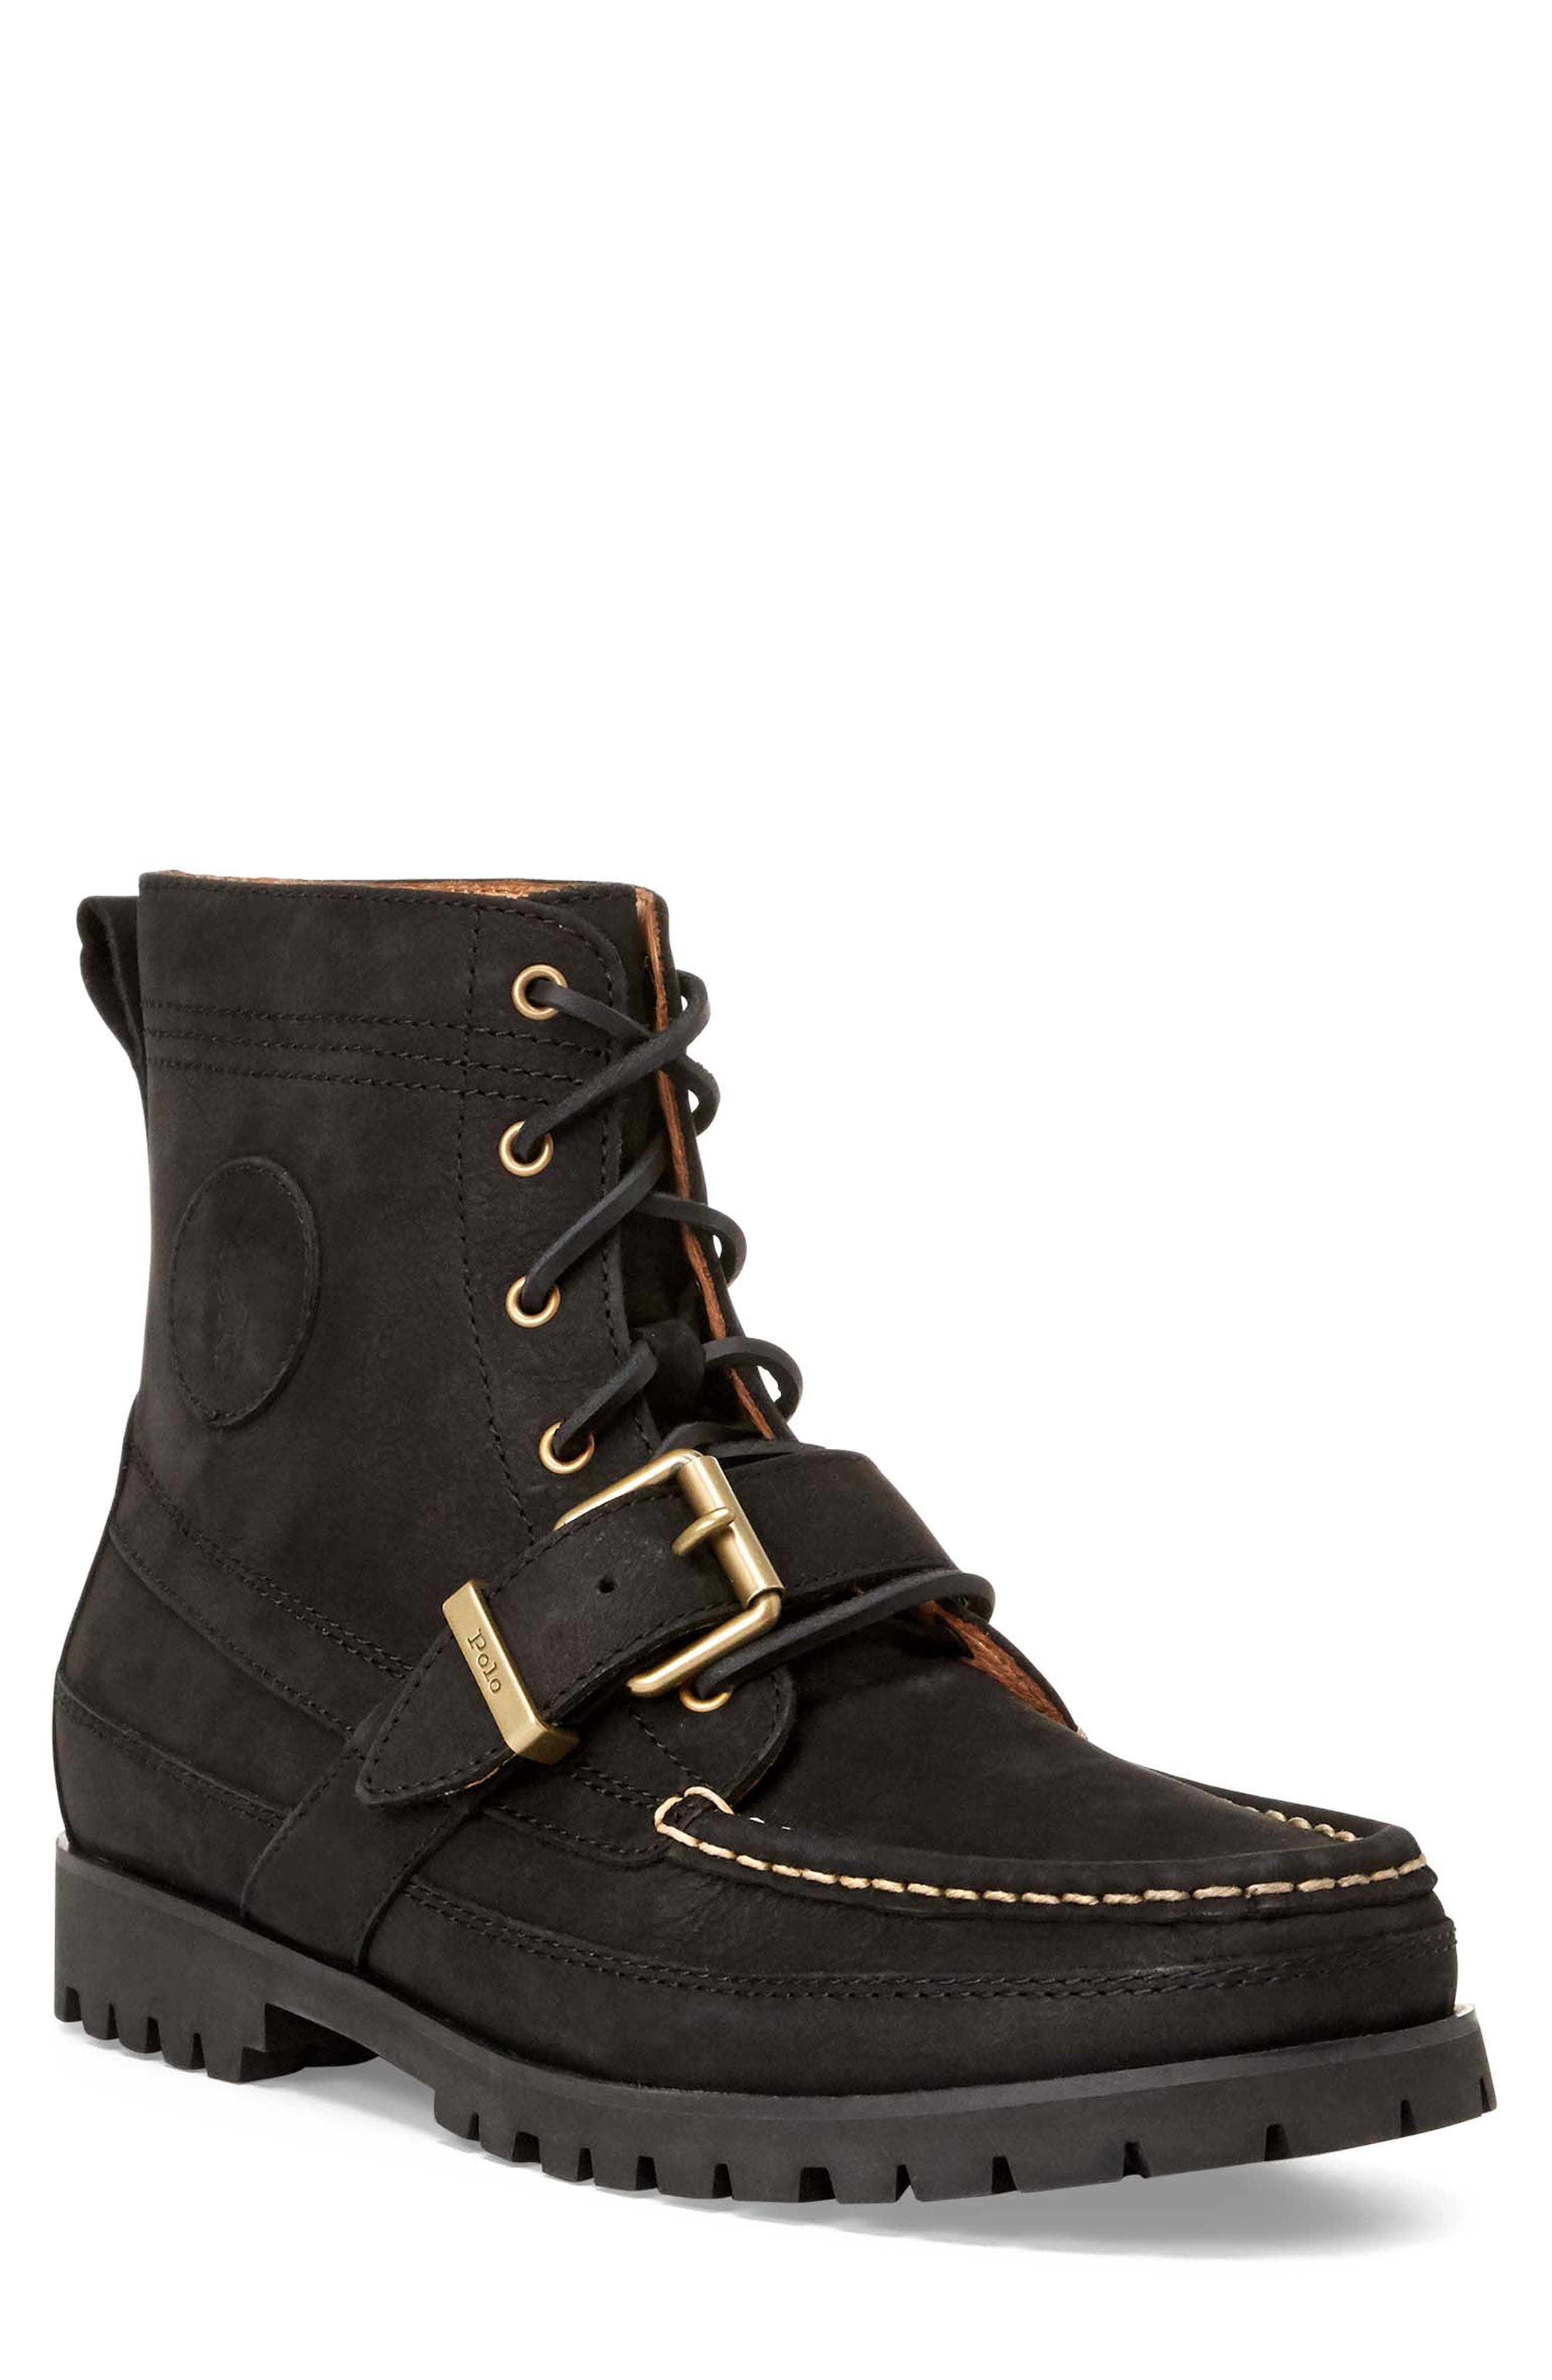 polo combat boots